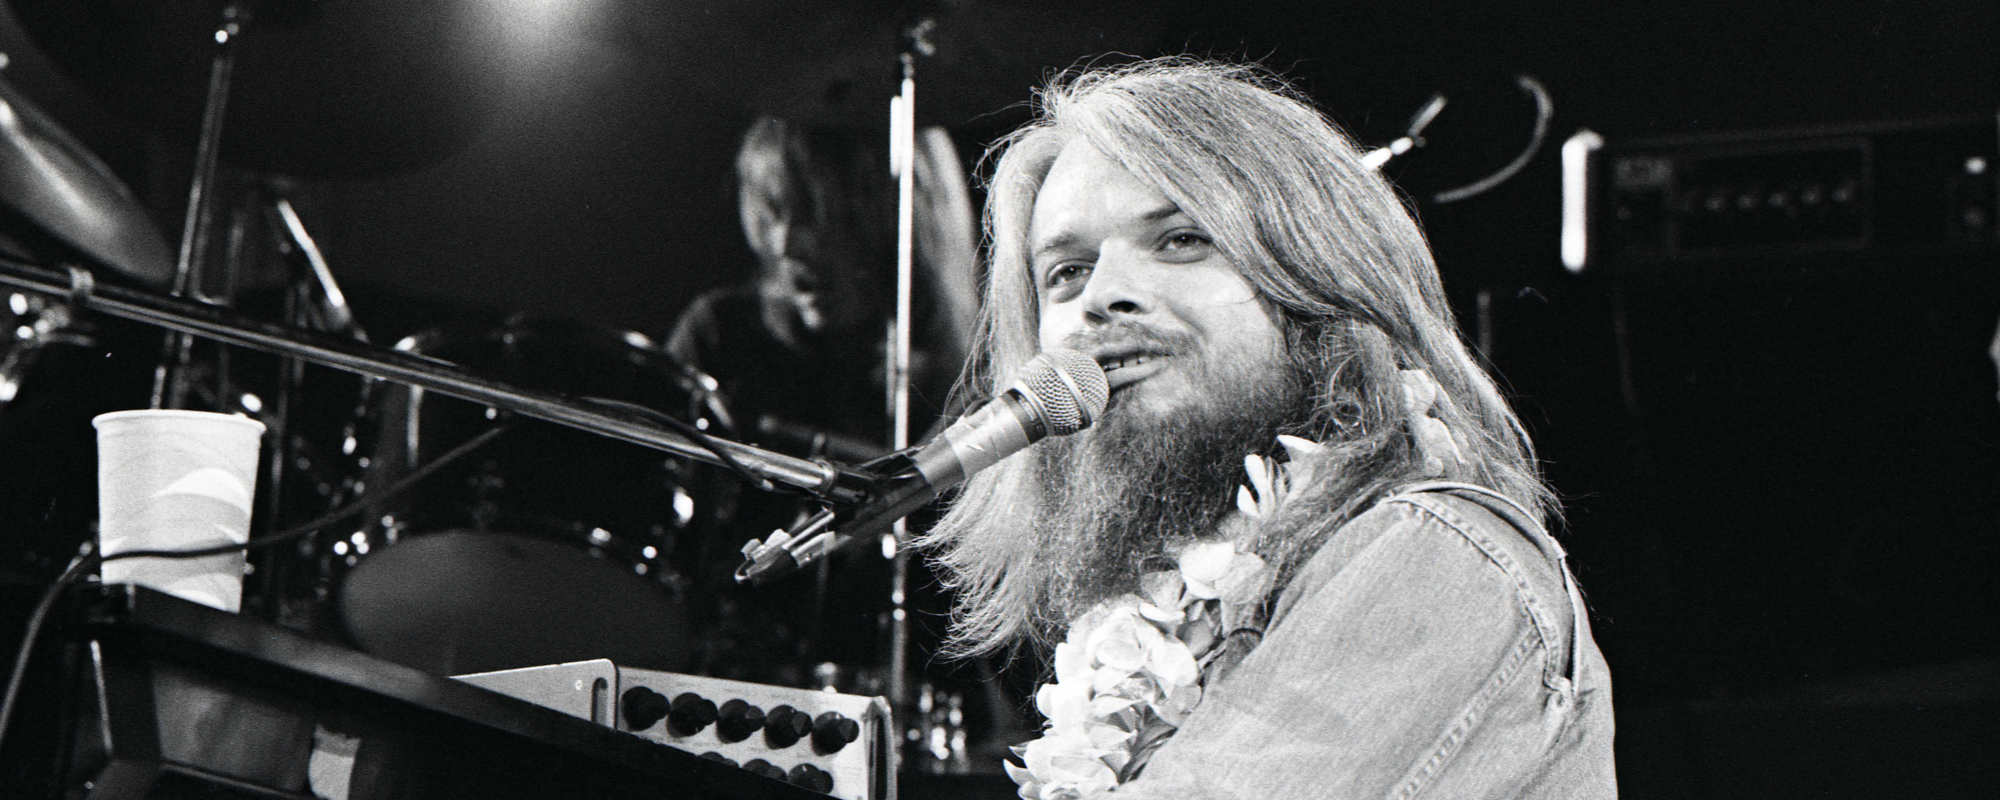 Review: Leon Russell’s Long Overdue Tribute Album is a Mixed Bag